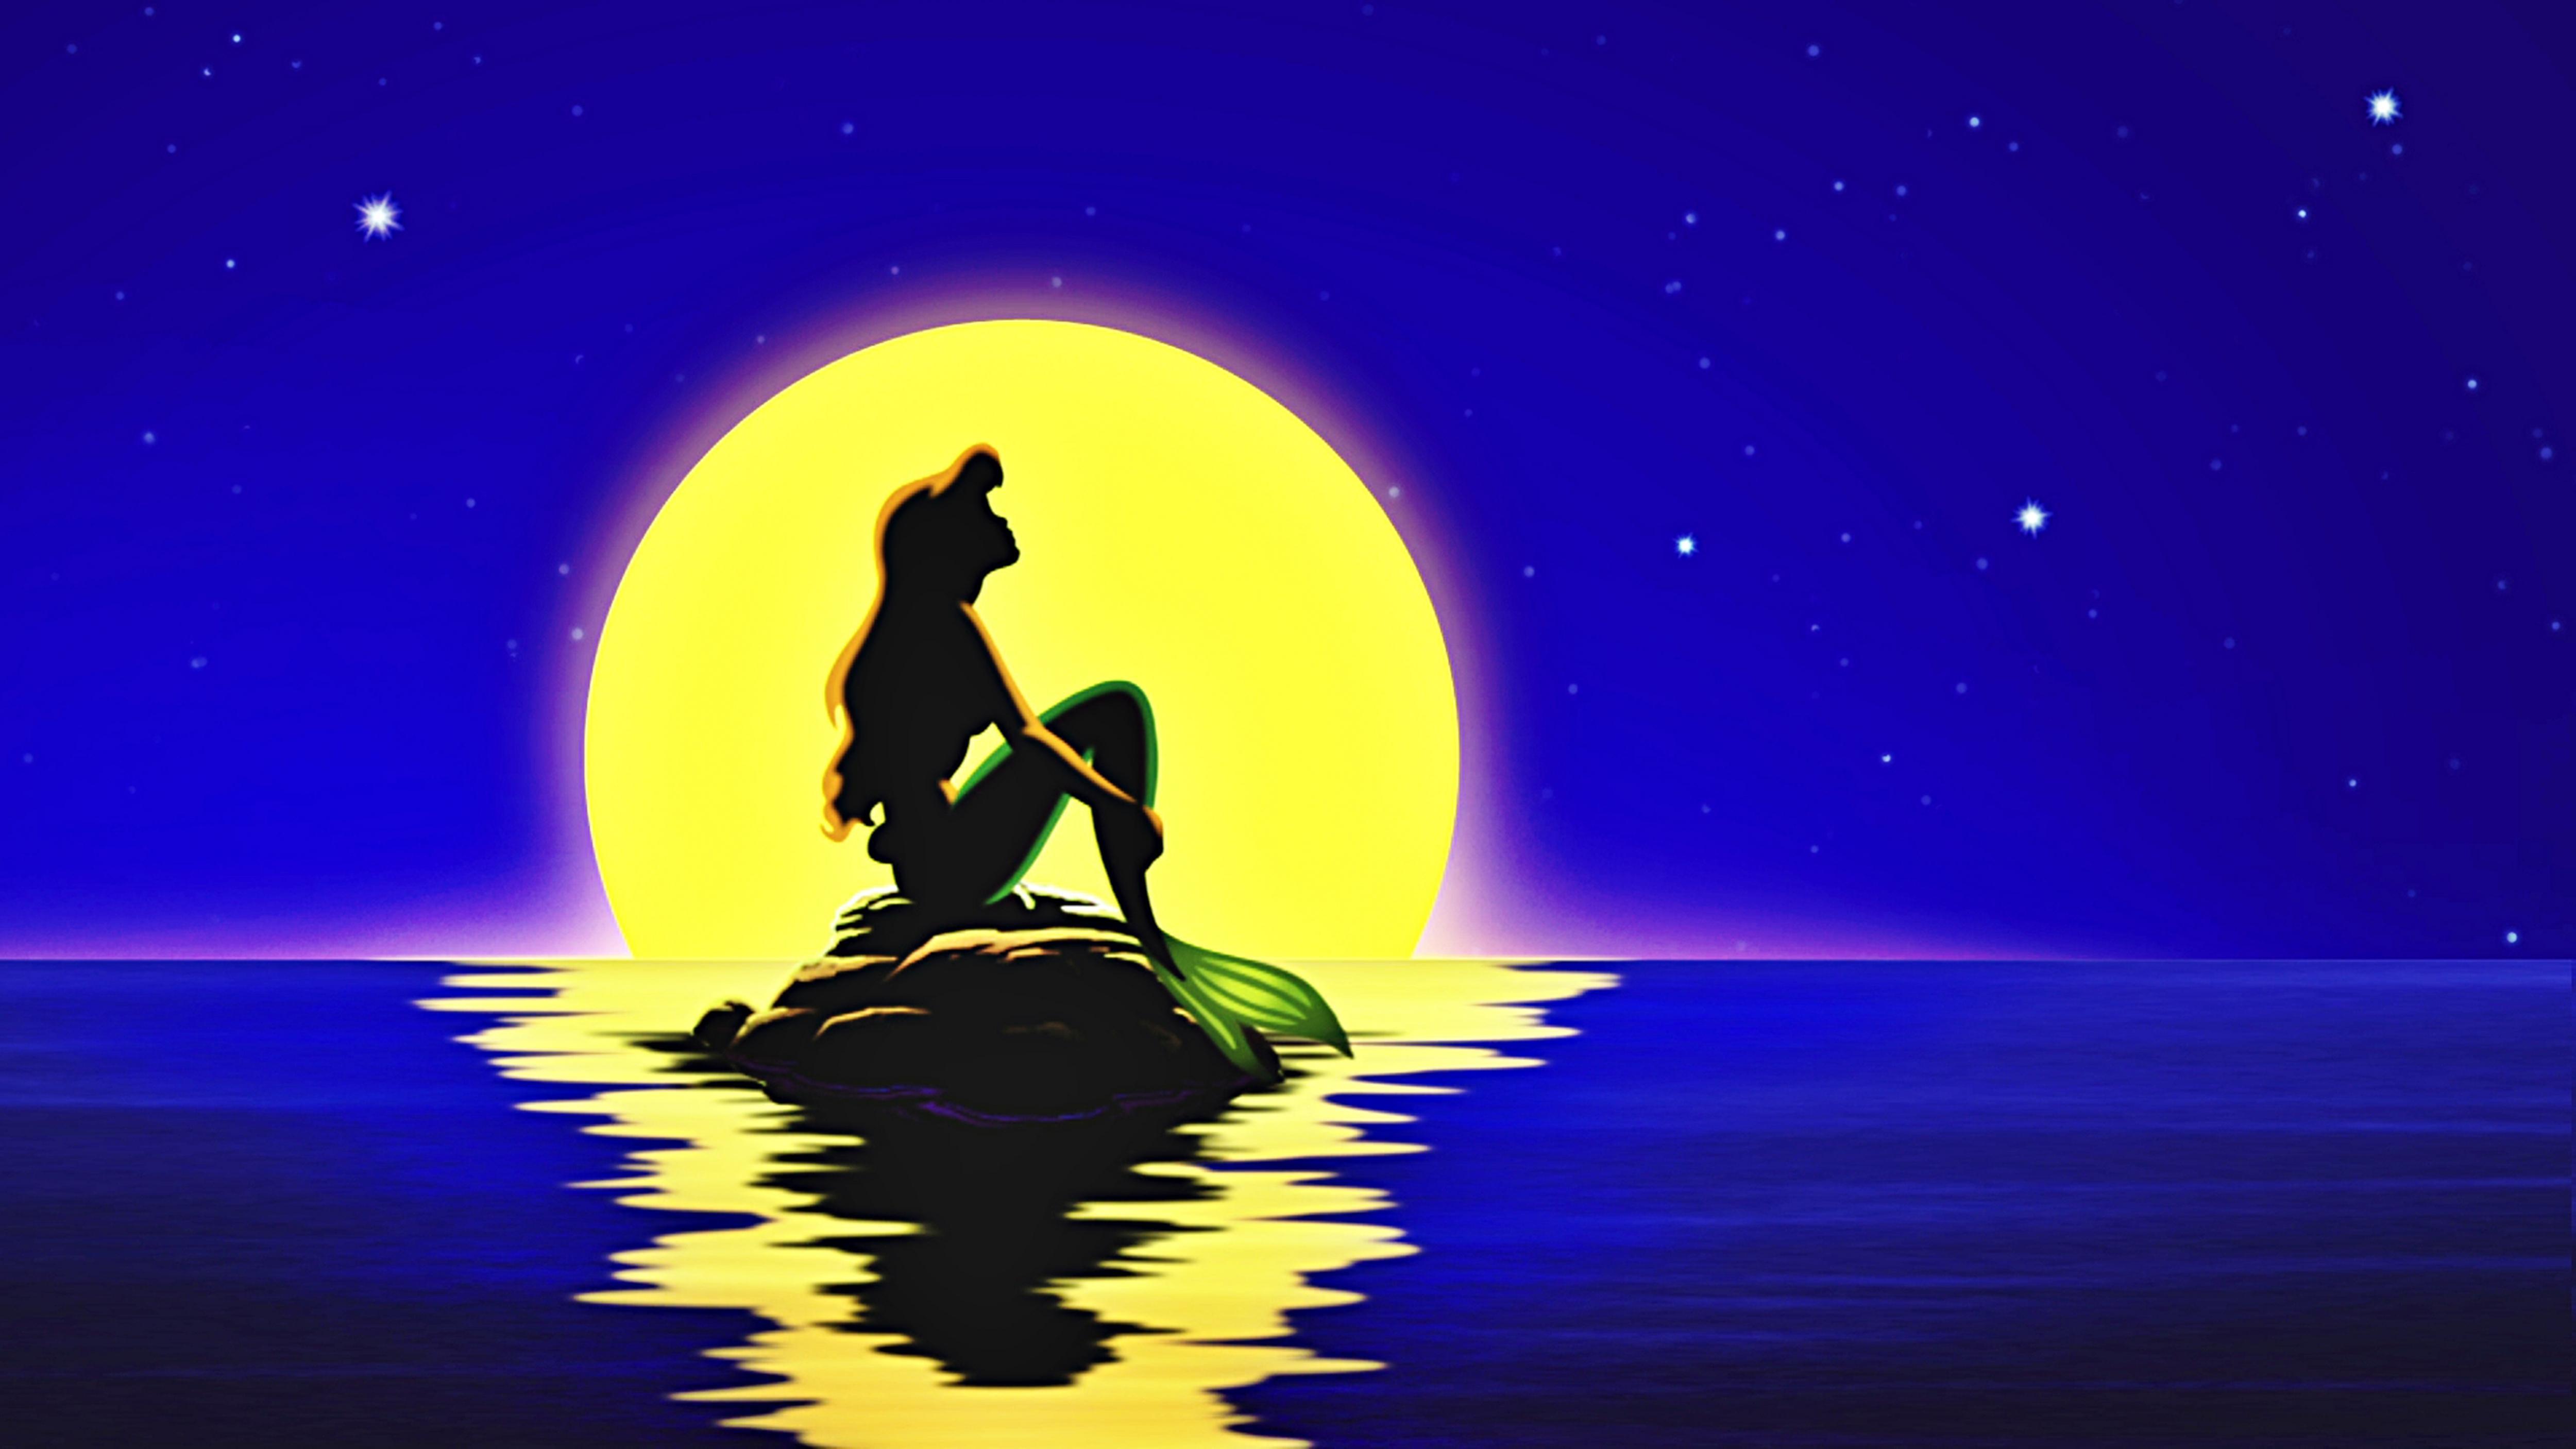 The Little Mermaid Background